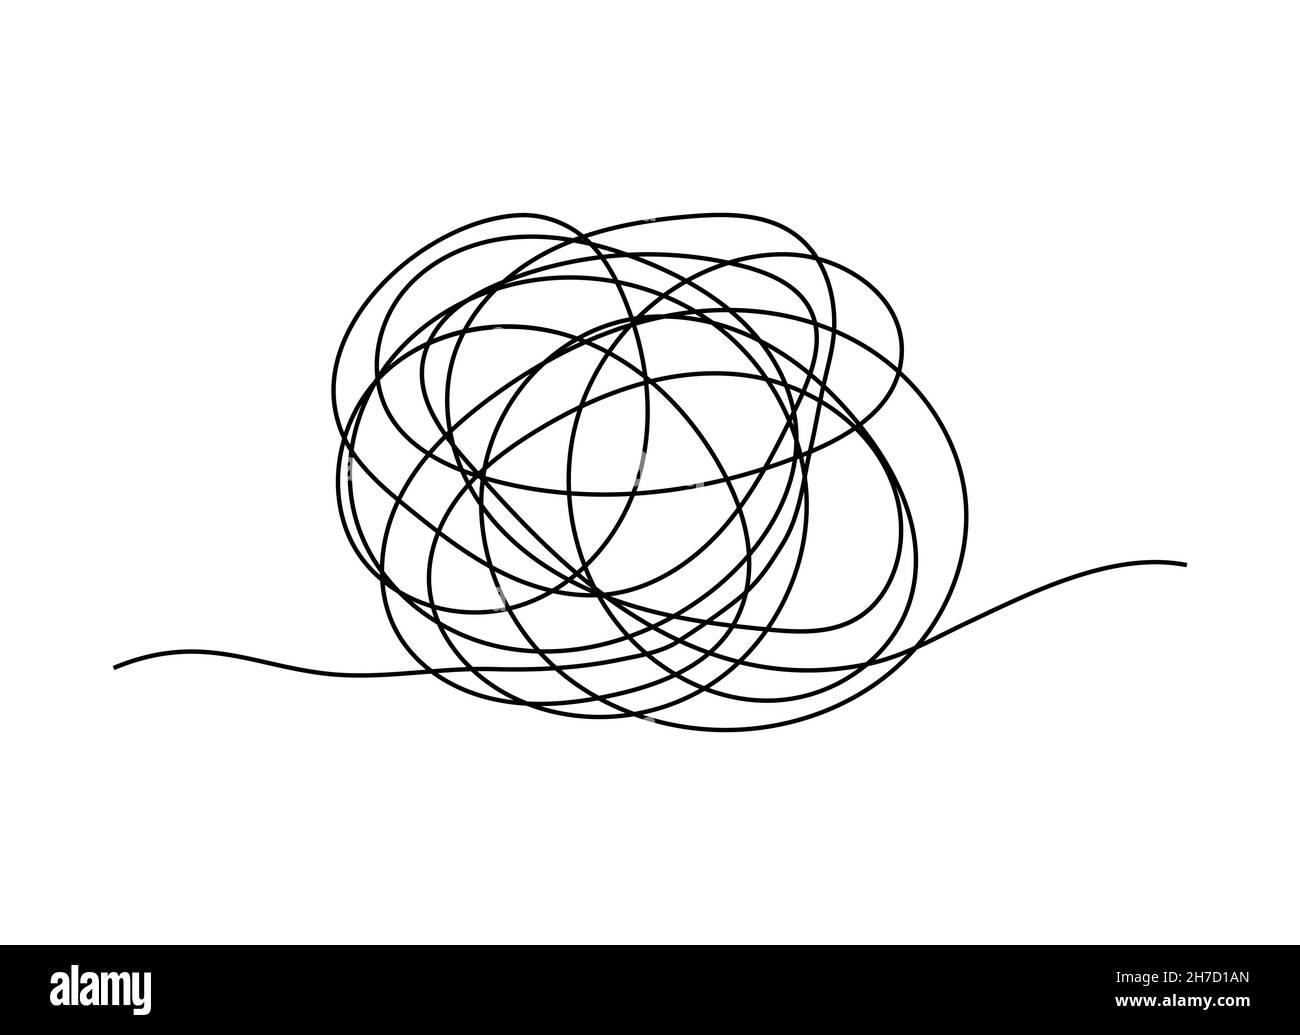 Abstract tangled texture. Random chaotic lines. Hand drawn object from the beginning and the end. Vector illustration. Stock Vector